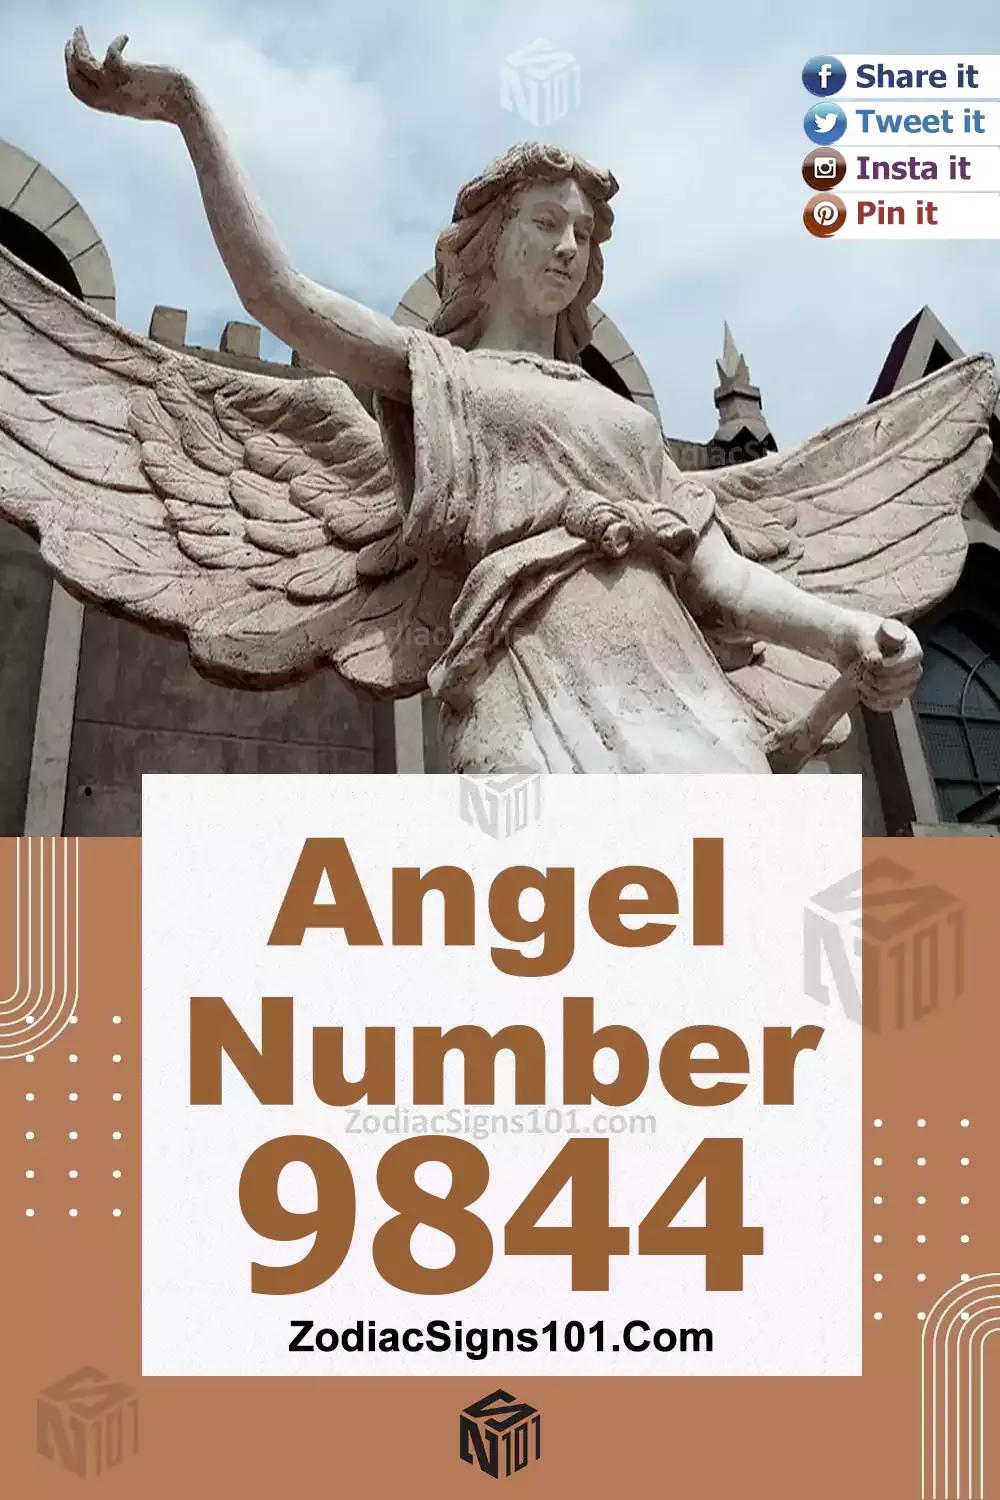 9844 Angel Number Meaning